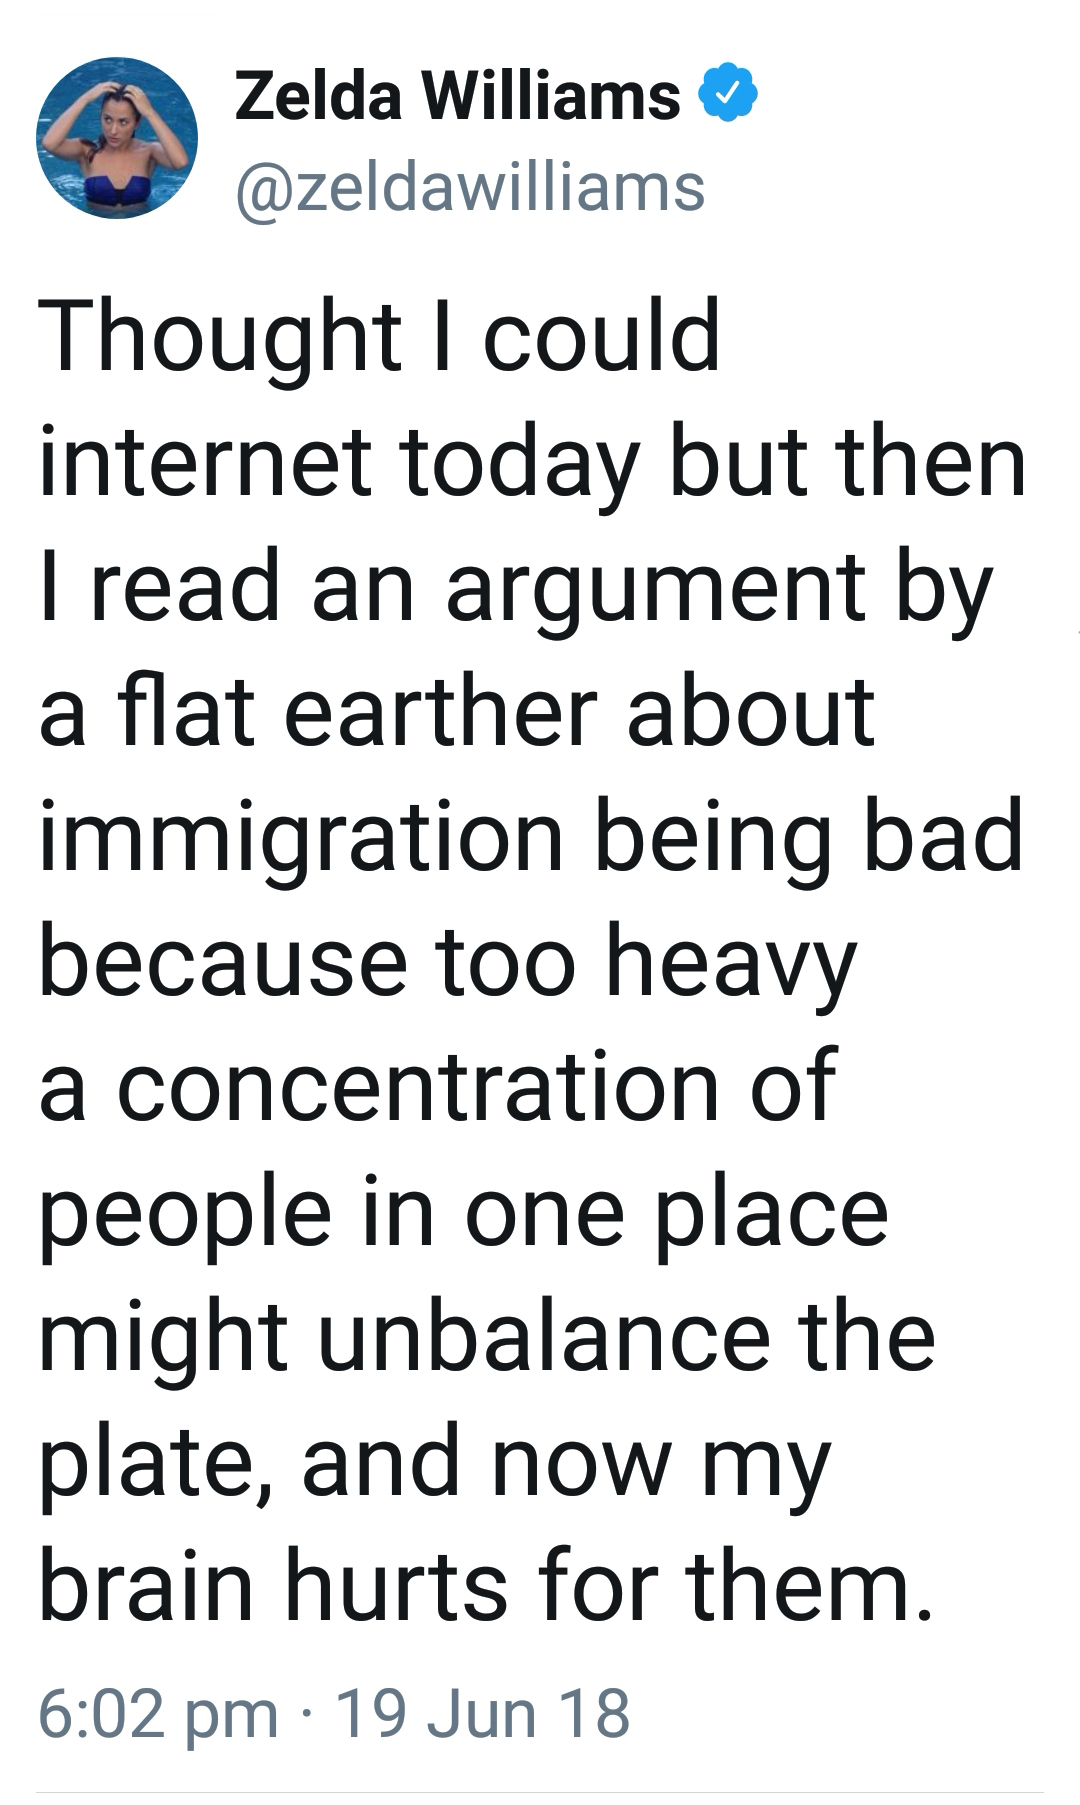 angle - Zelda Williams Thought I could internet today but then I read an argument by a flat earther about immigration being bad because too heavy a concentration of people in one place might unbalance the plate, and now my brain hurts for them. 19 Jun 18